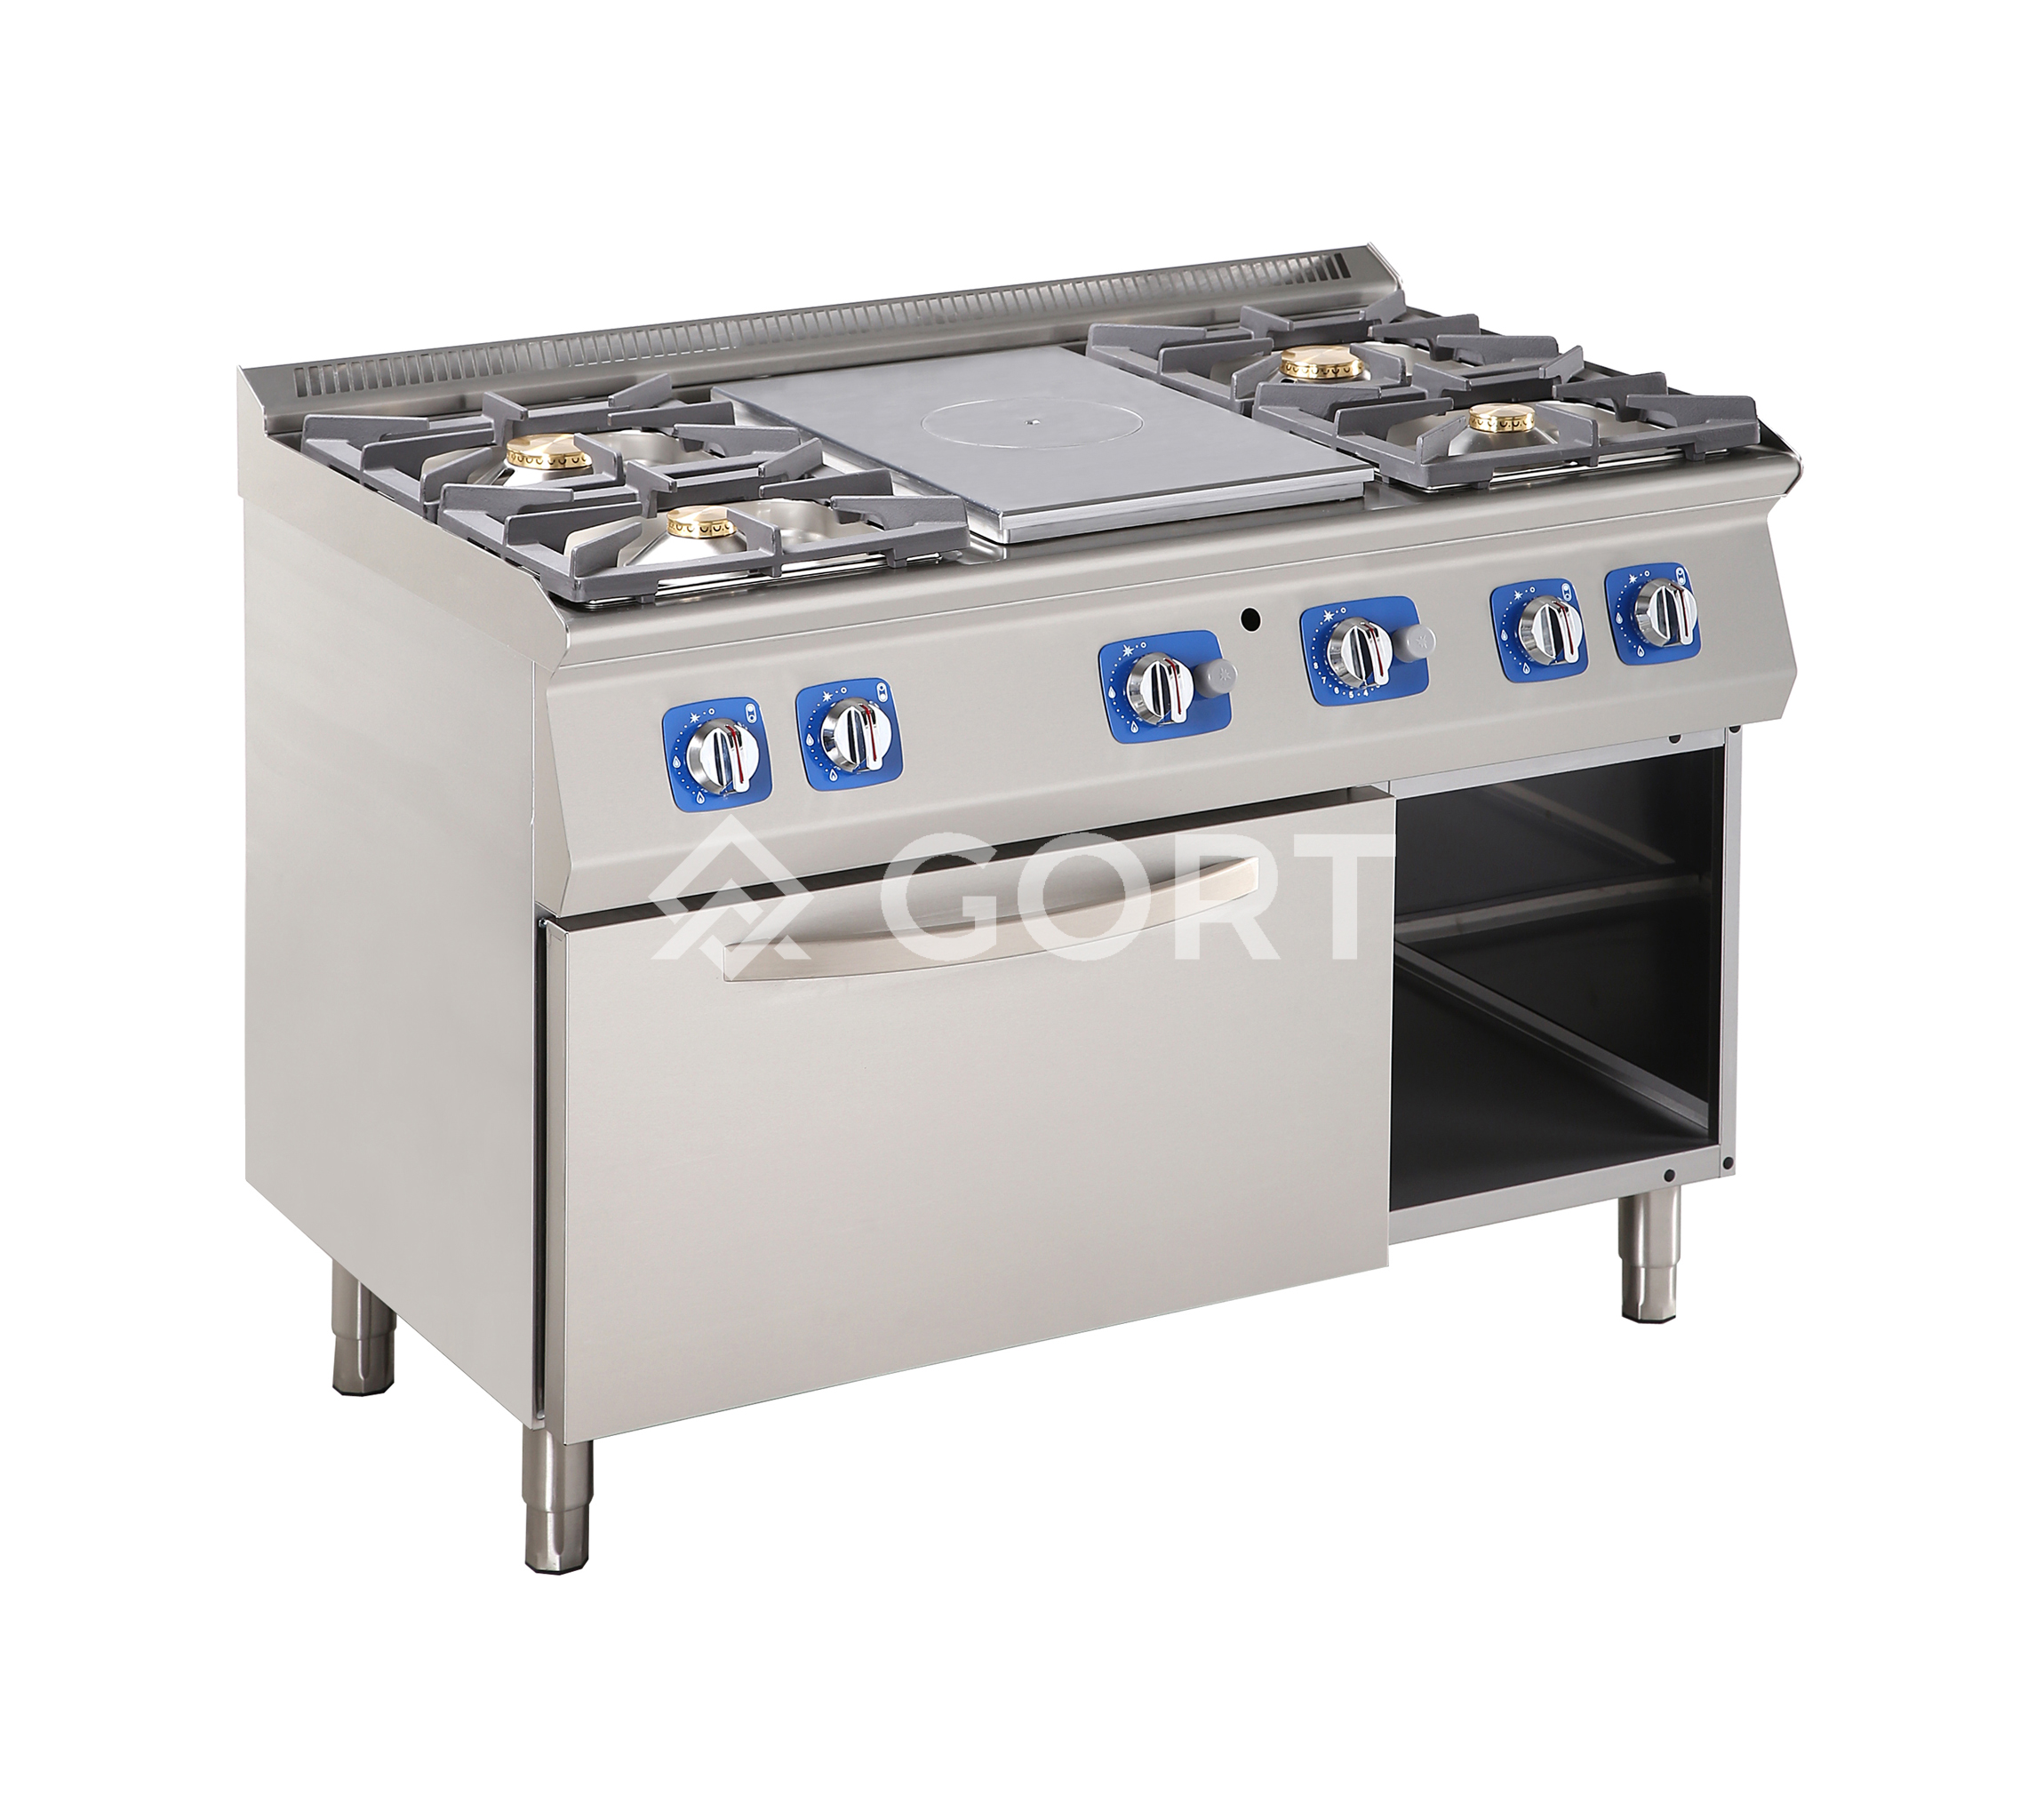 Gas solid top with 4 burner gas cooking range on gas oven